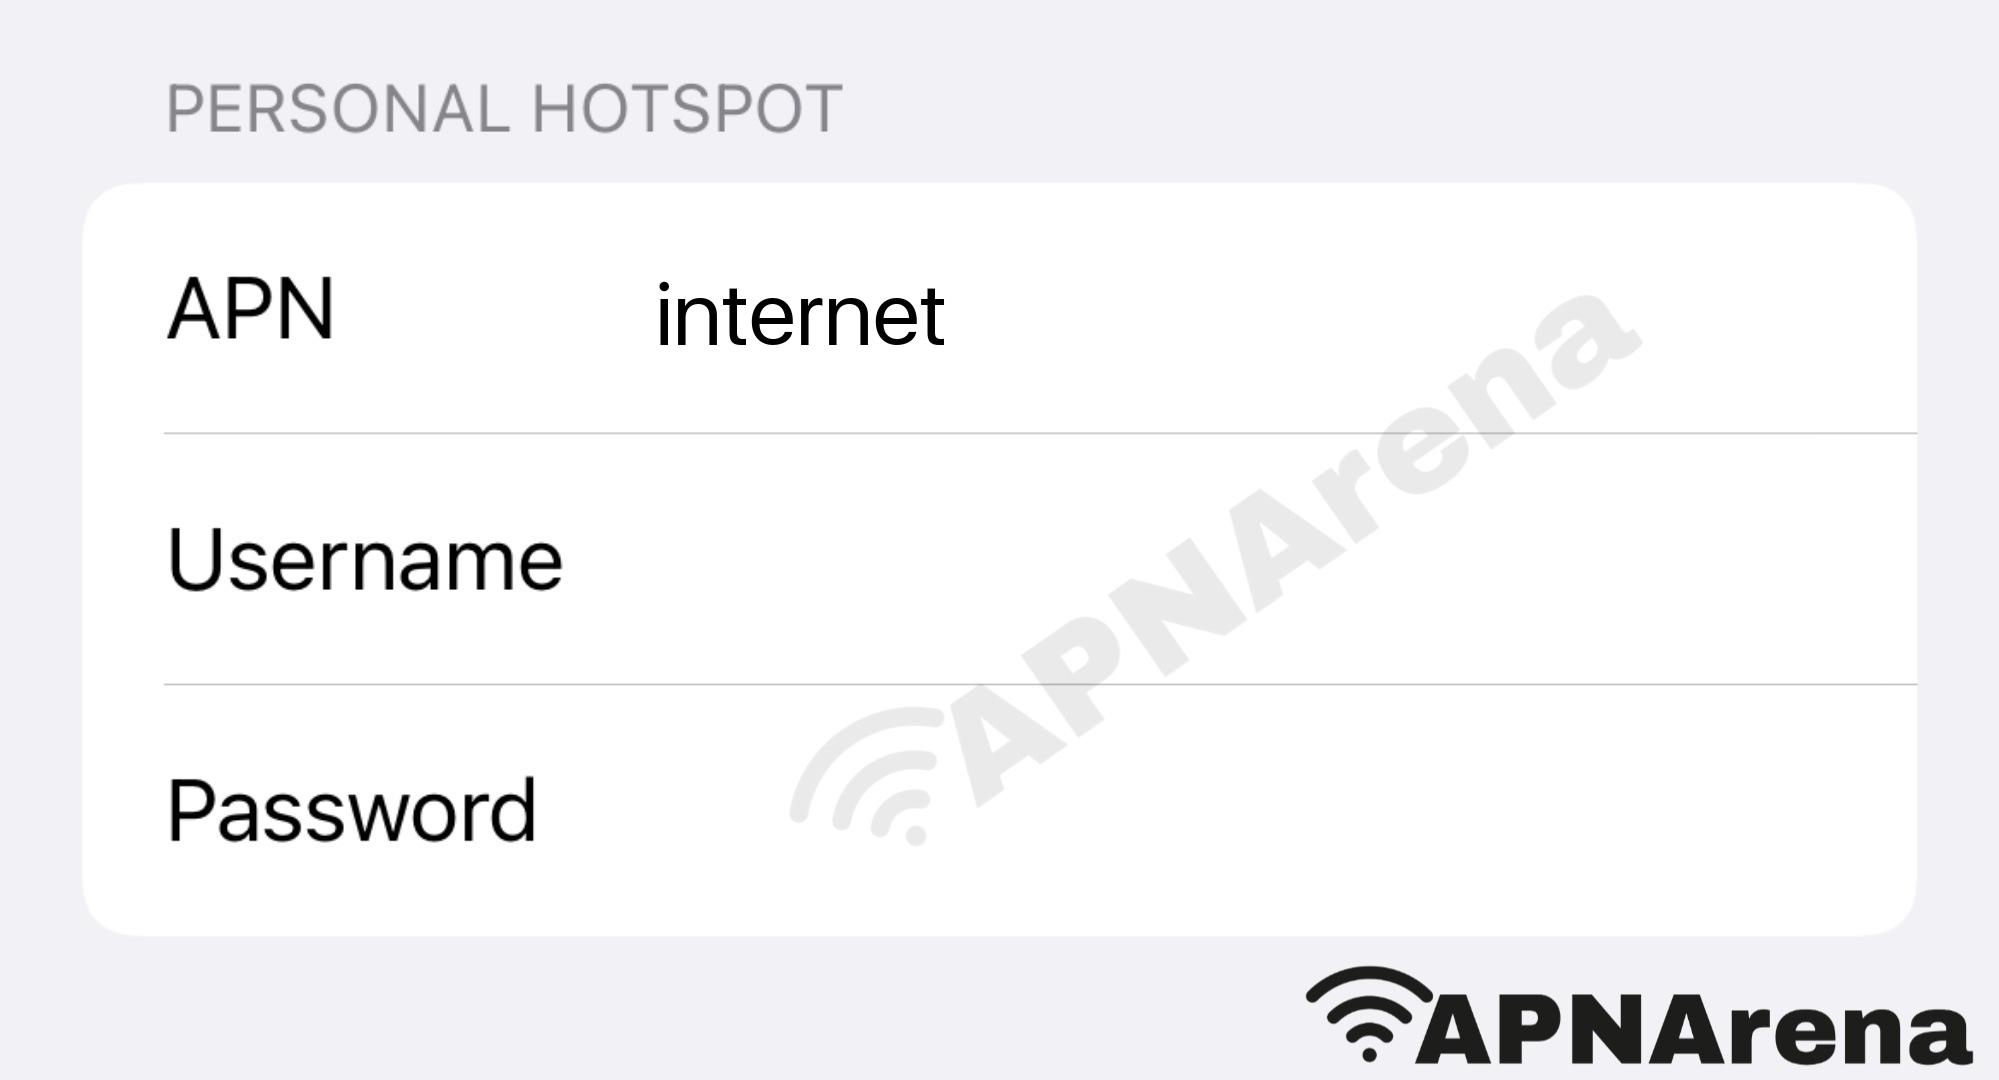 Halotel Personal Hotspot Settings for iPhone